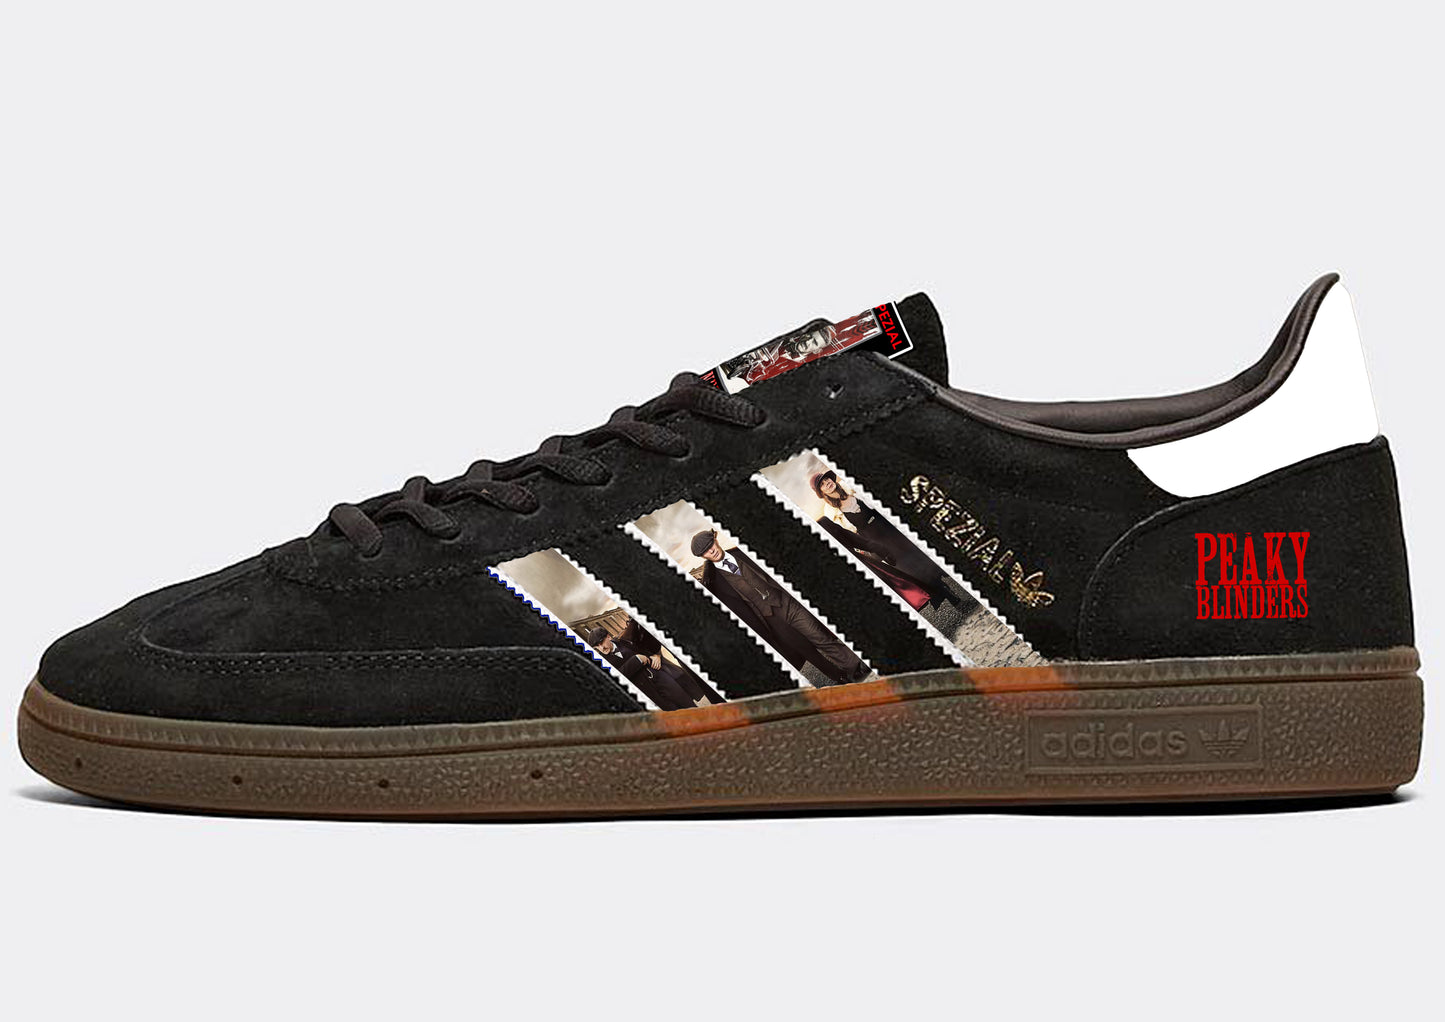 Limited edition Peaky Blinders Black Adidas Spezial trainers / sneakers